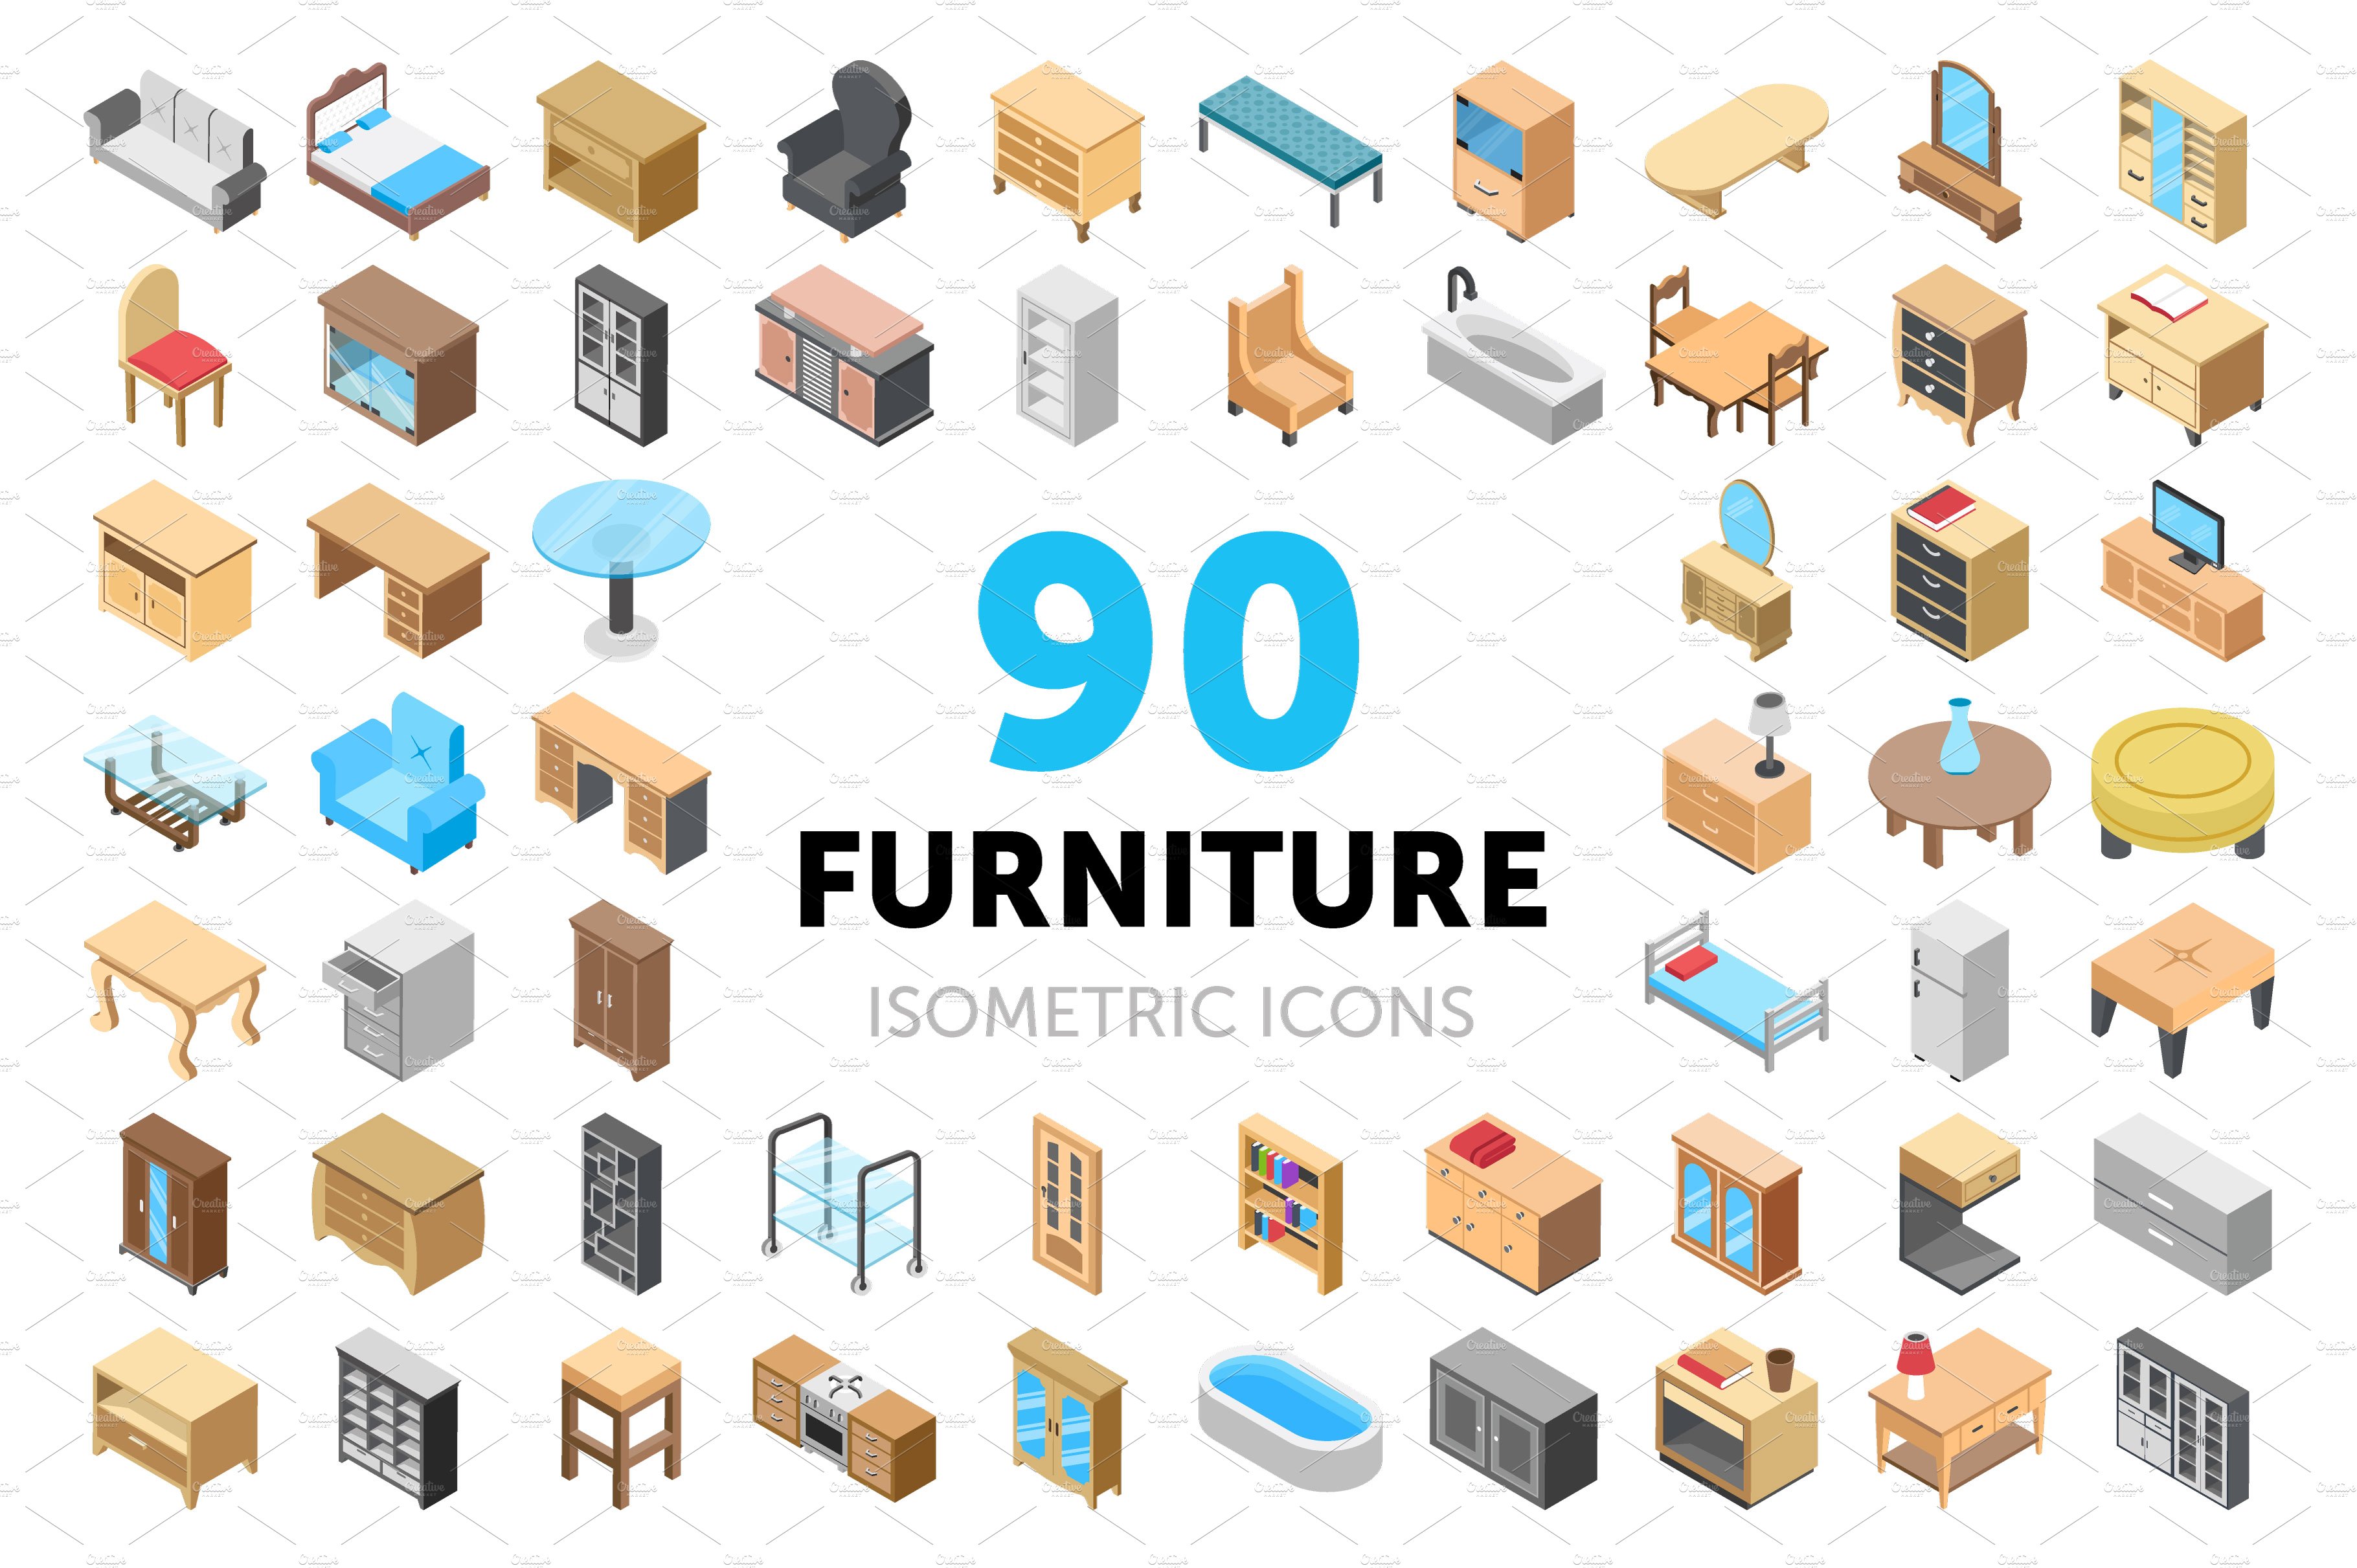 90 Furniture Isometric Icons cover image.